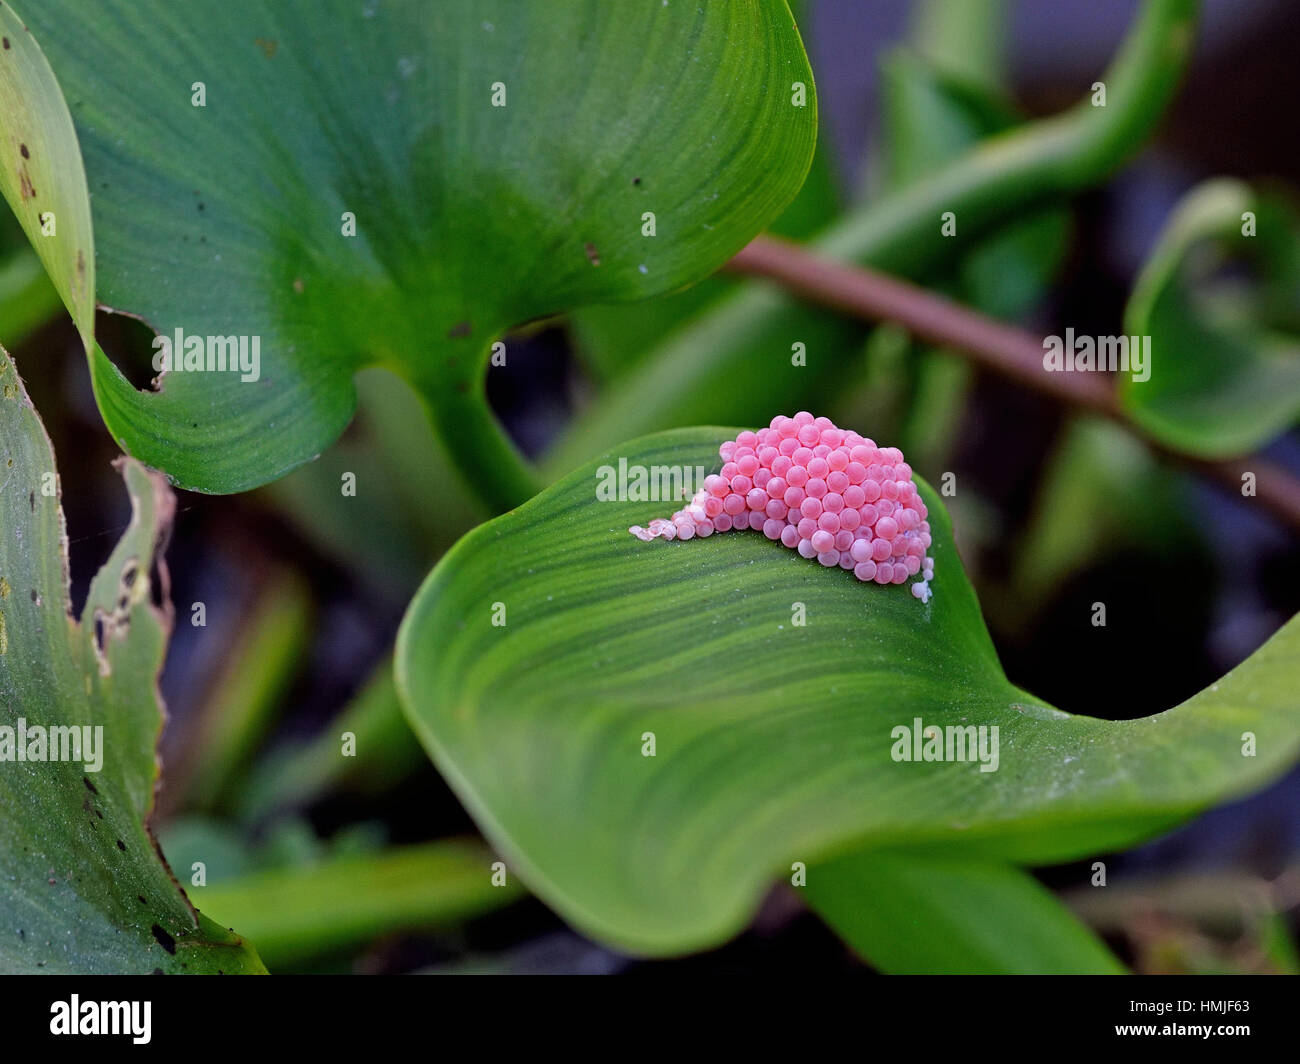 Eggs of the Golden Apple Snail (Pomacea canaliculata) on a Water Hyacinth (Eichornia crassipes) leaf in a canal in Central Thailand Stock Photo